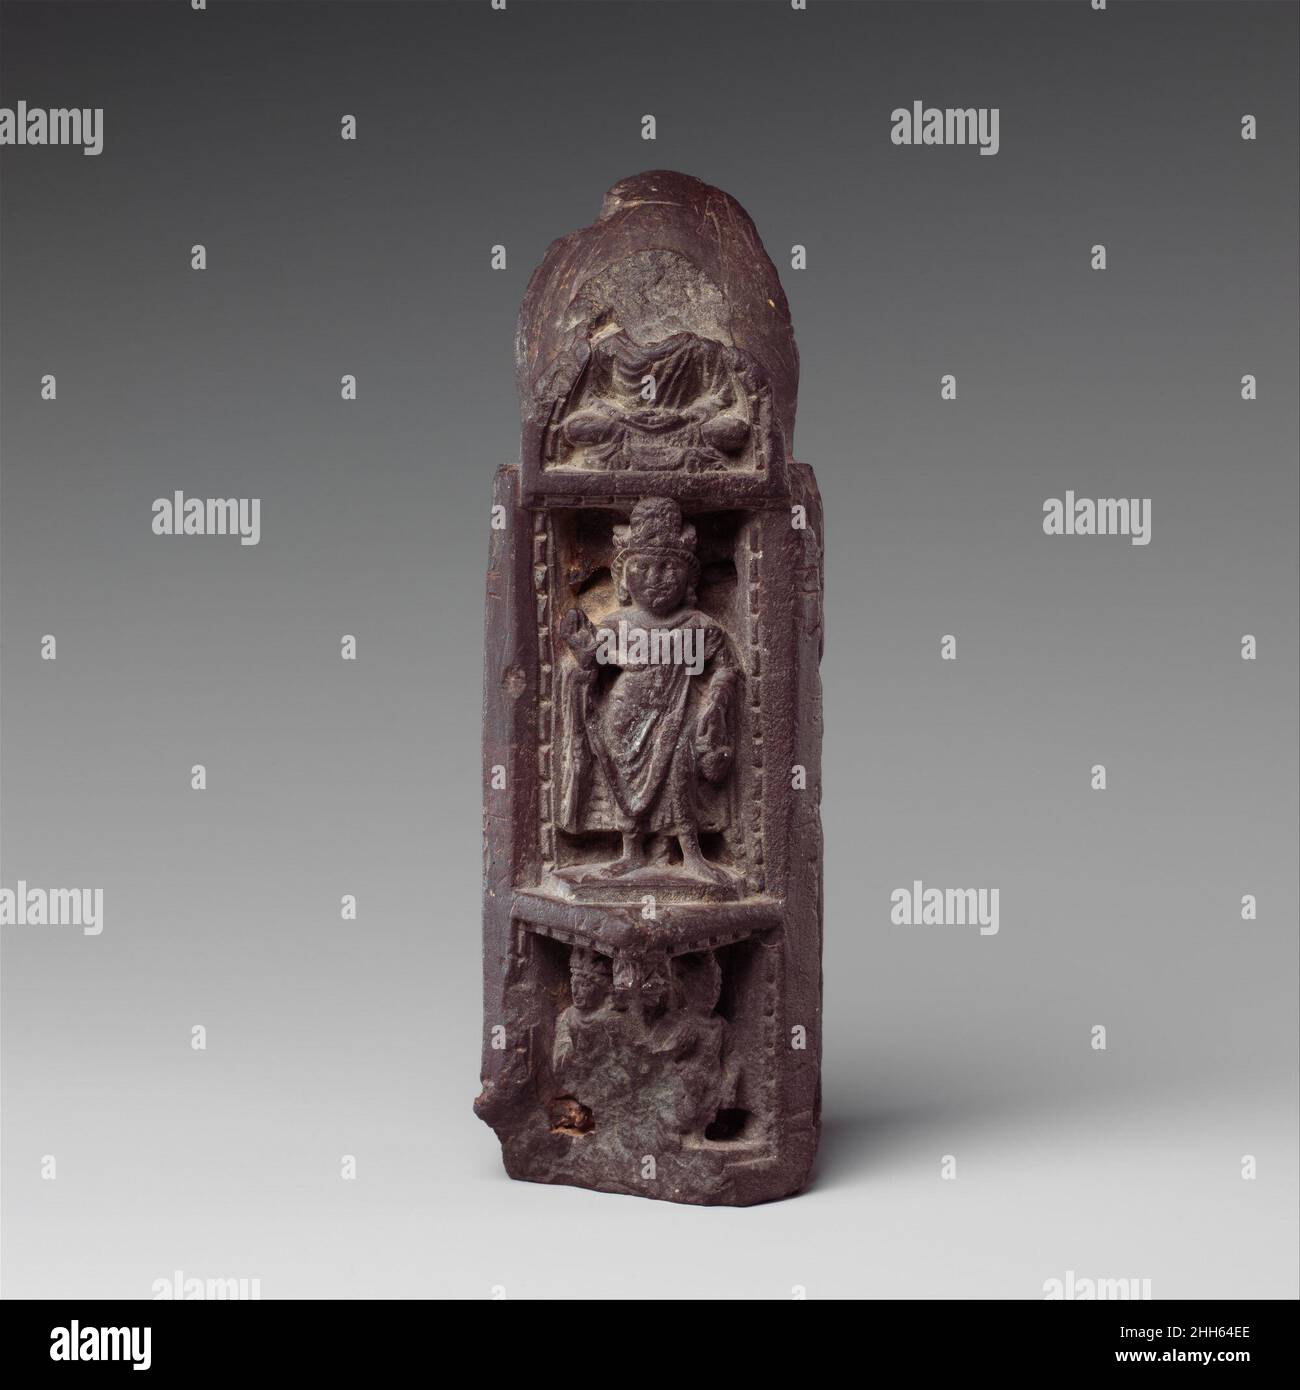 Three-Sided Section of a Portable Shrine with Scenes from the Life of the Buddha 5th–6th century Pakistan (ancient region of Gandhara) This wedge-shaped quarter section is part of a shrine that would have been circular when closed. The upper four interior registers show events from Shakyamuni's childhood and his great departure; the lowest two registers juxtapose an emaciated Buddha (representing his enlightenment) with his first sermon.. Three-Sided Section of a Portable Shrine with Scenes from the Life of the Buddha  38224 Stock Photo